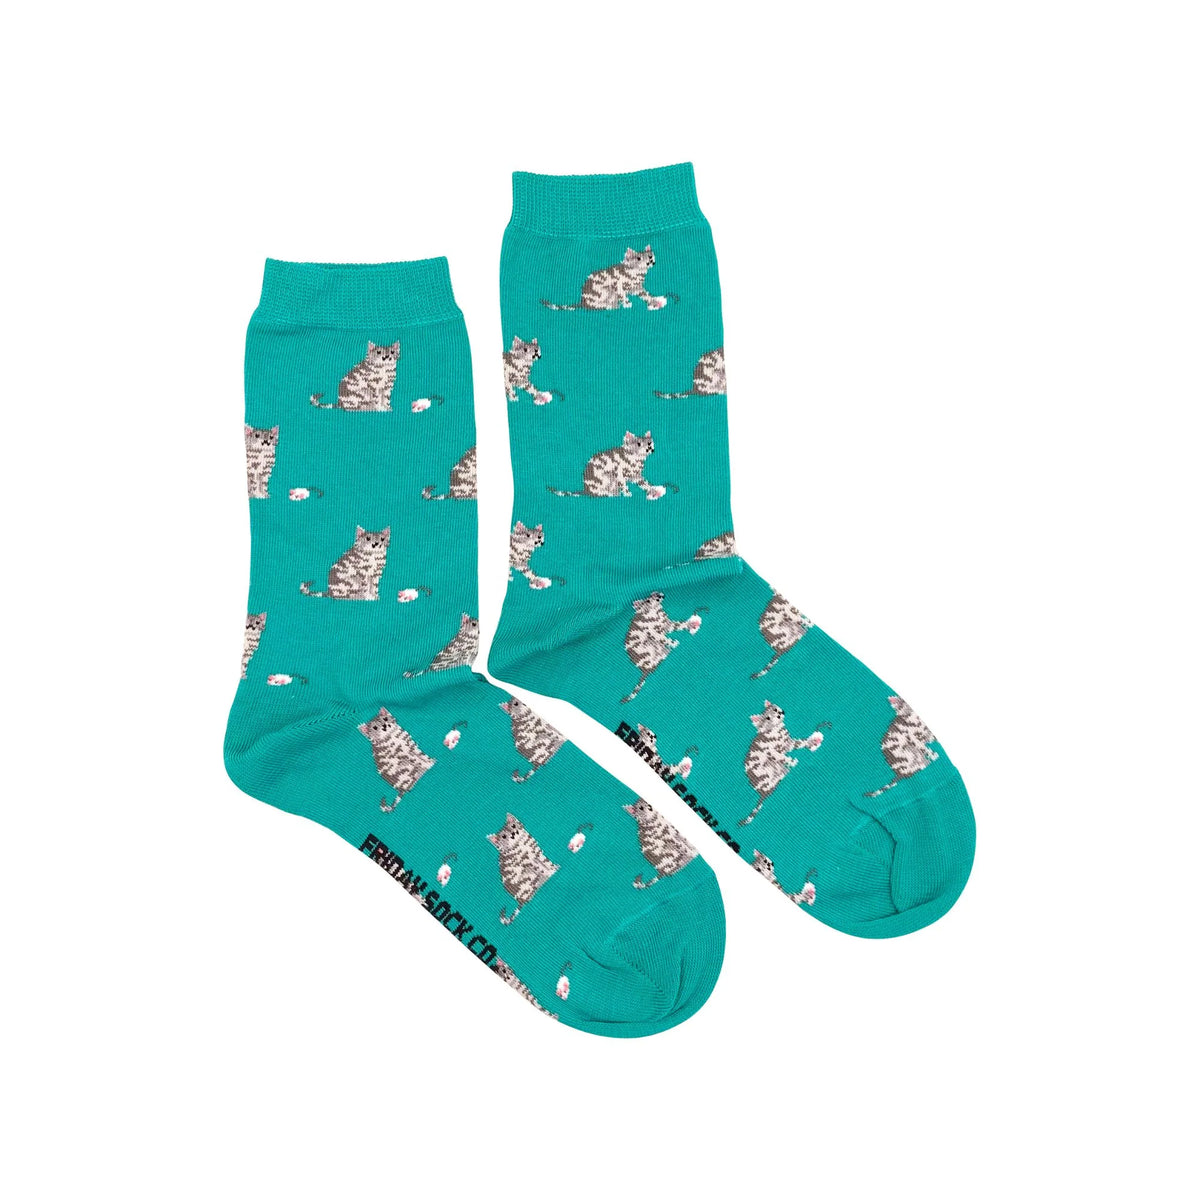 Friday Sock Co. - Women's Socks Cat & Mouse Mismatched